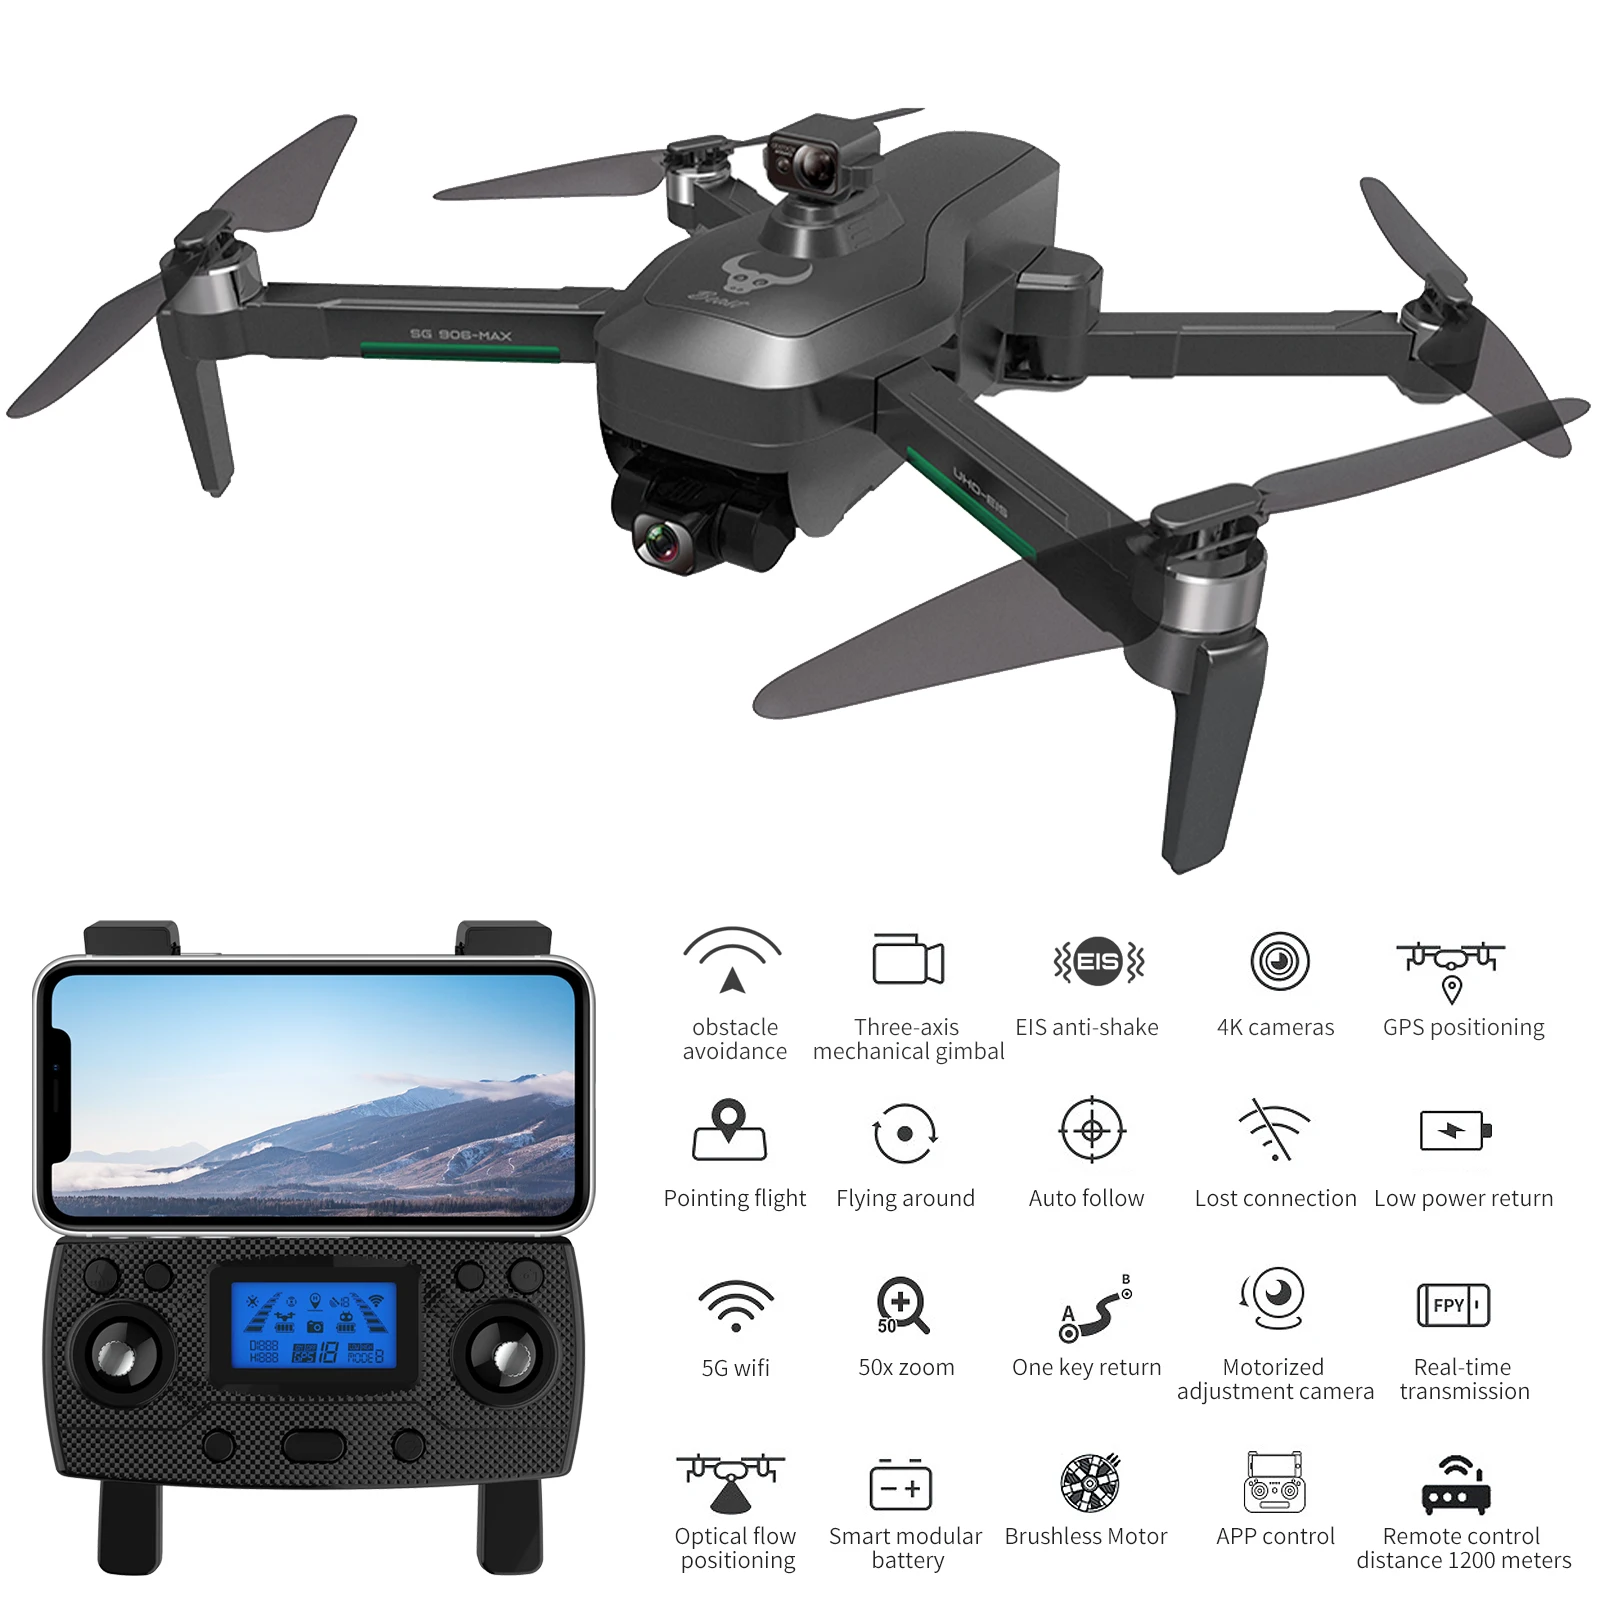 Details about   SG906 Pro 2 FPV 3-axis Gimbal 4K HD Camera 5G Wifi GPS RC Drone Quadcopter B0E3 